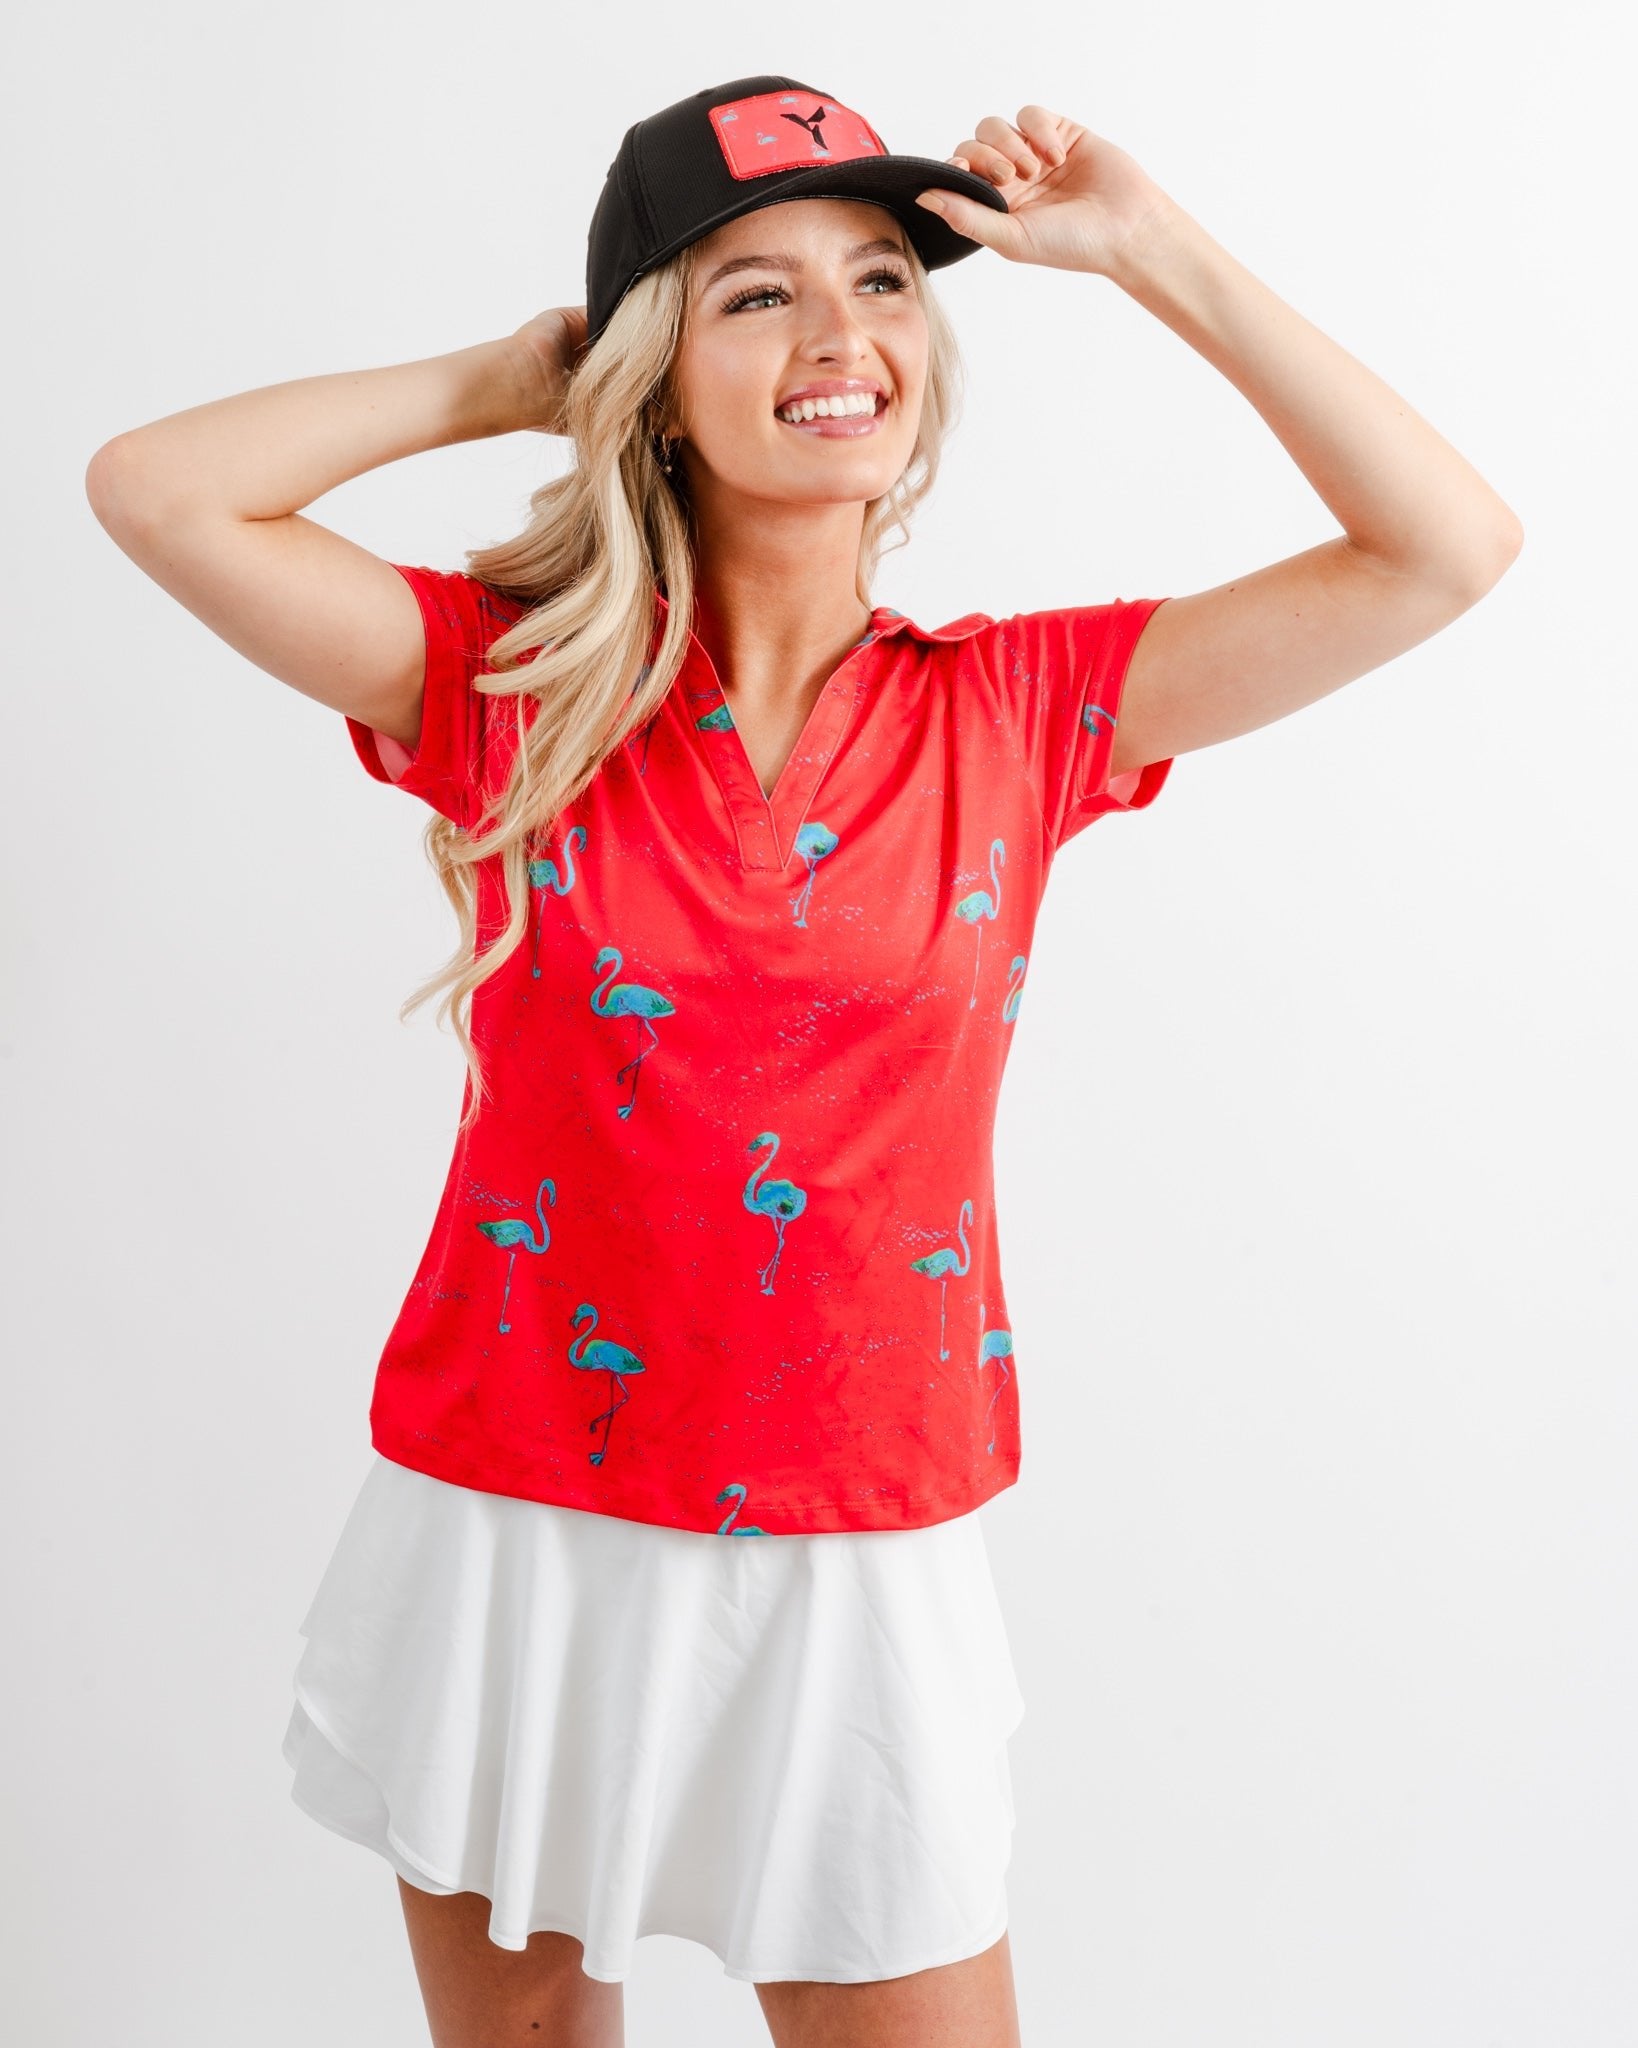 Flamingo Golf Hat For Men And Women Just Beachy Only 24 95 Yatta Golf